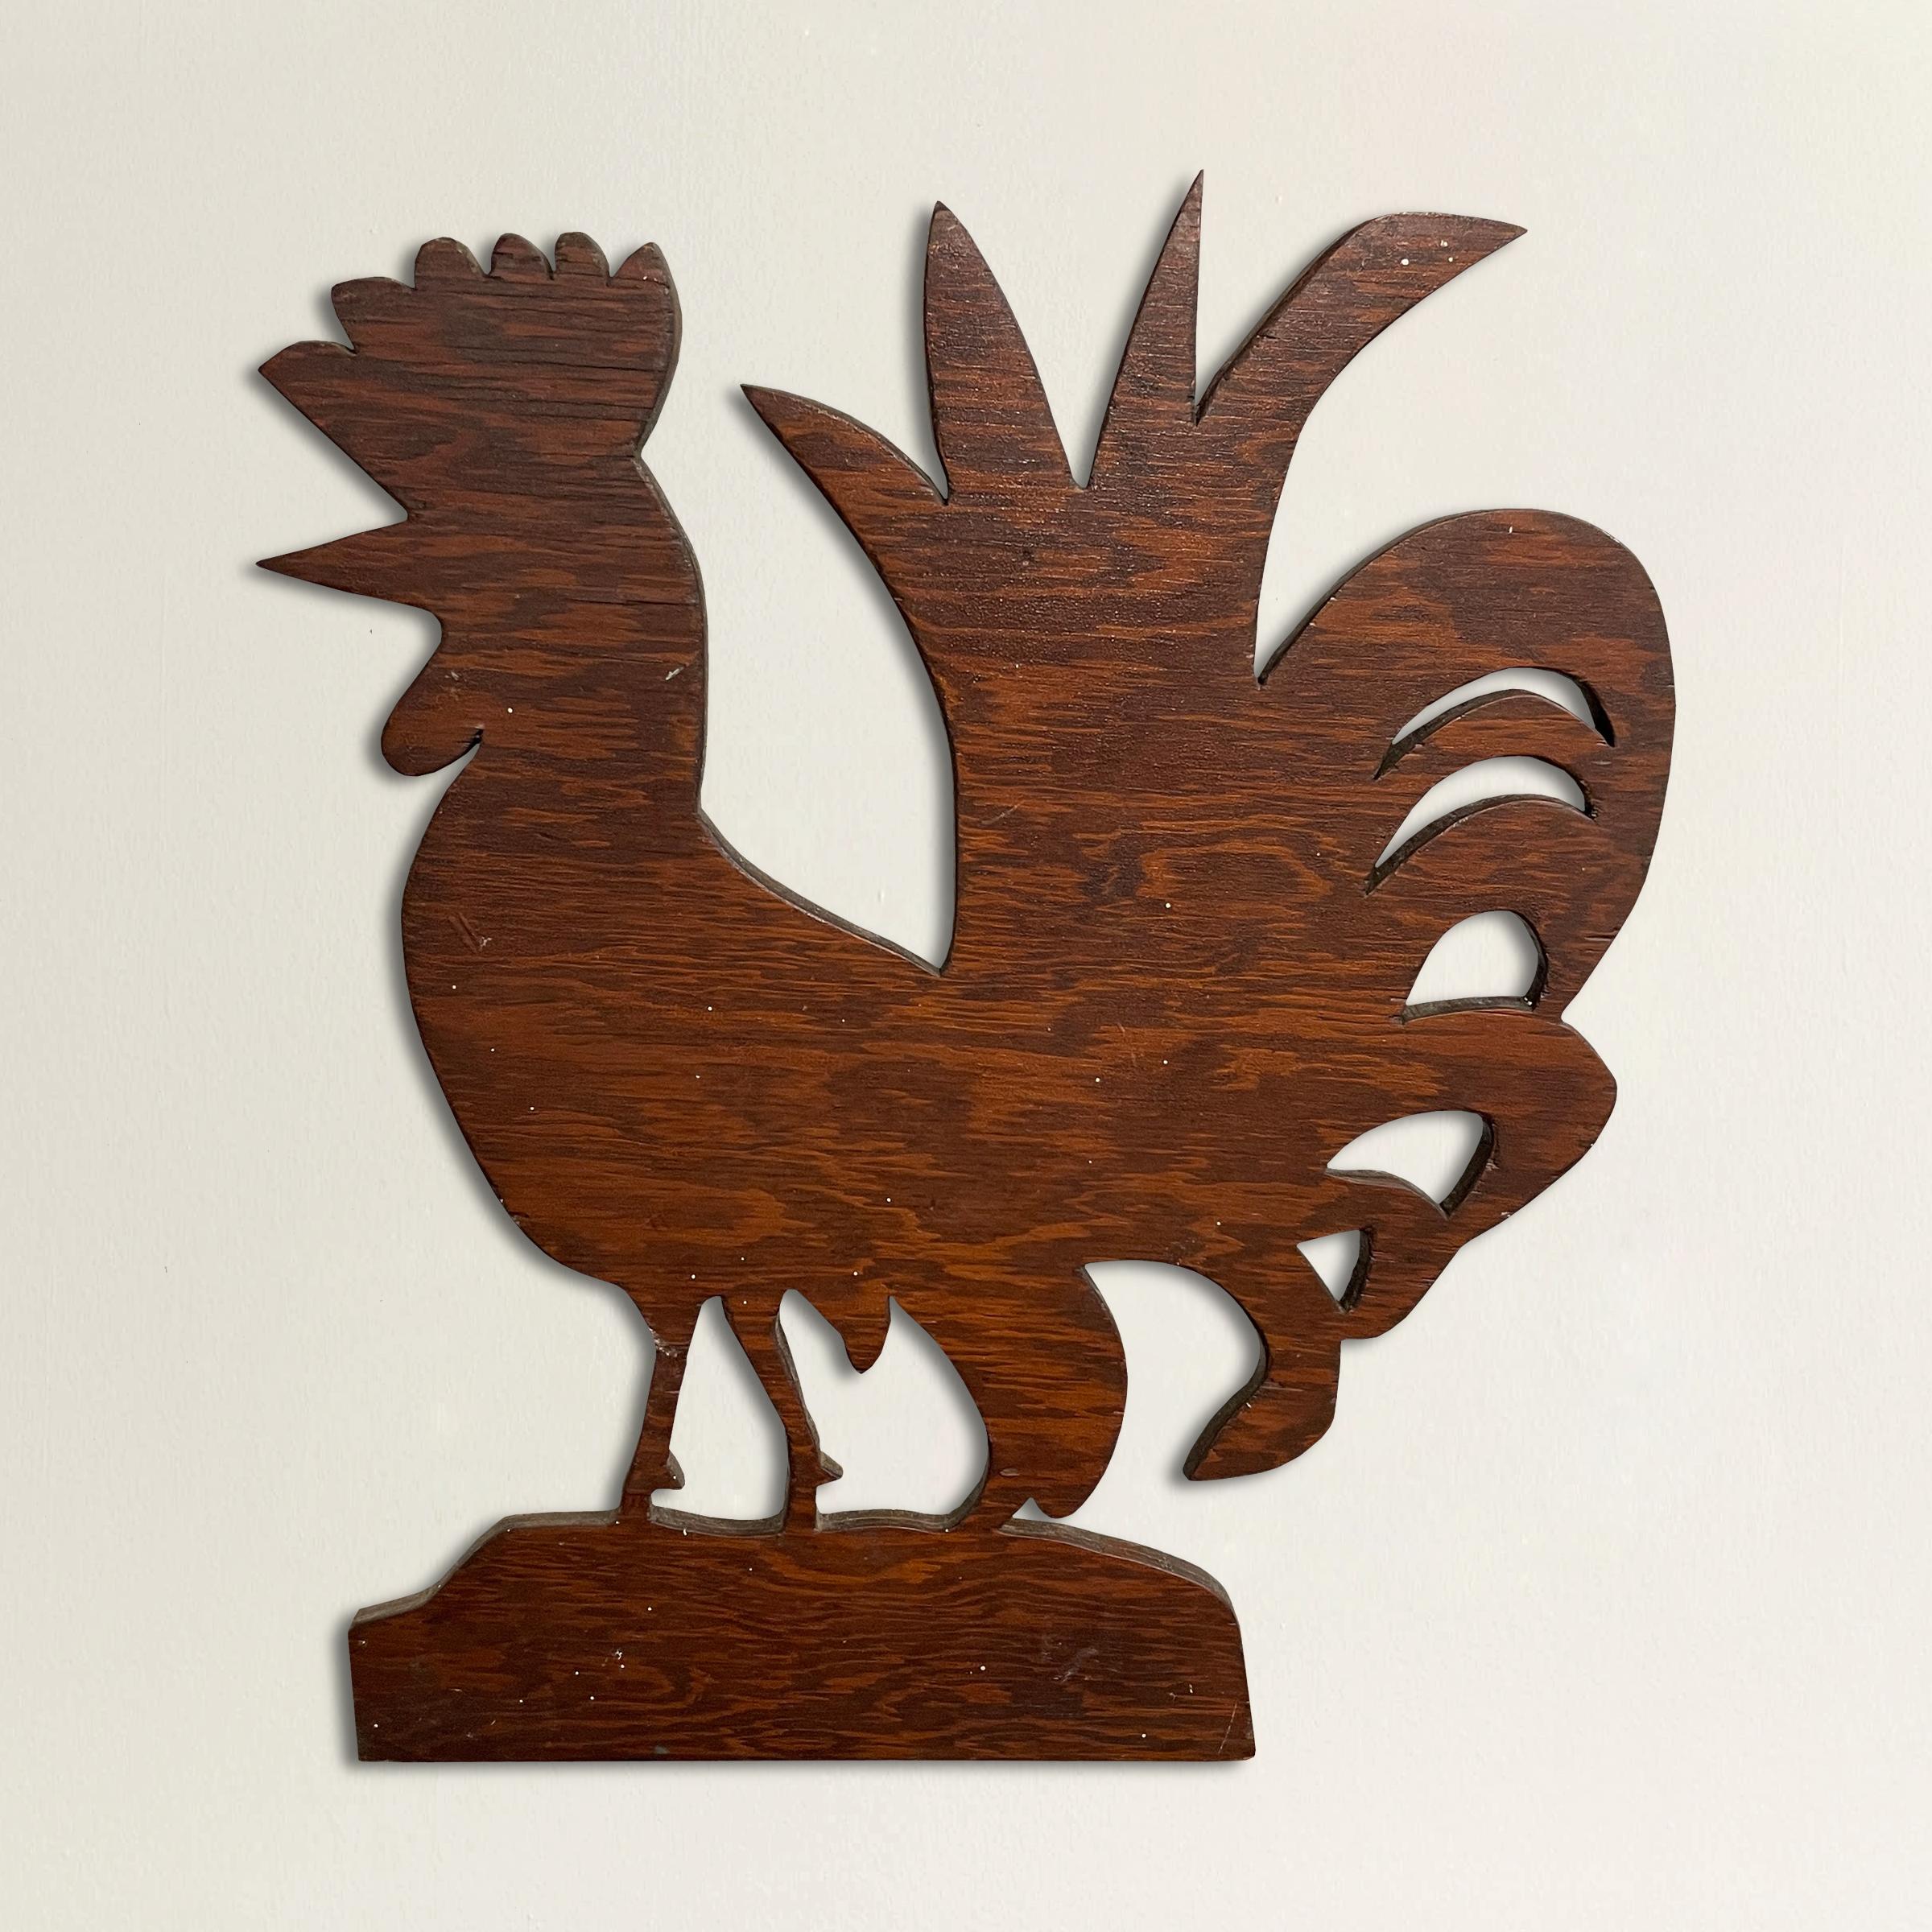 A wonderfully whimsical and charming 20th century American Folk Art carved wood rooster with wildly expressive tail feathers and head, on a custom wall mount. Perfect for hanging in your kitchen or pantry!